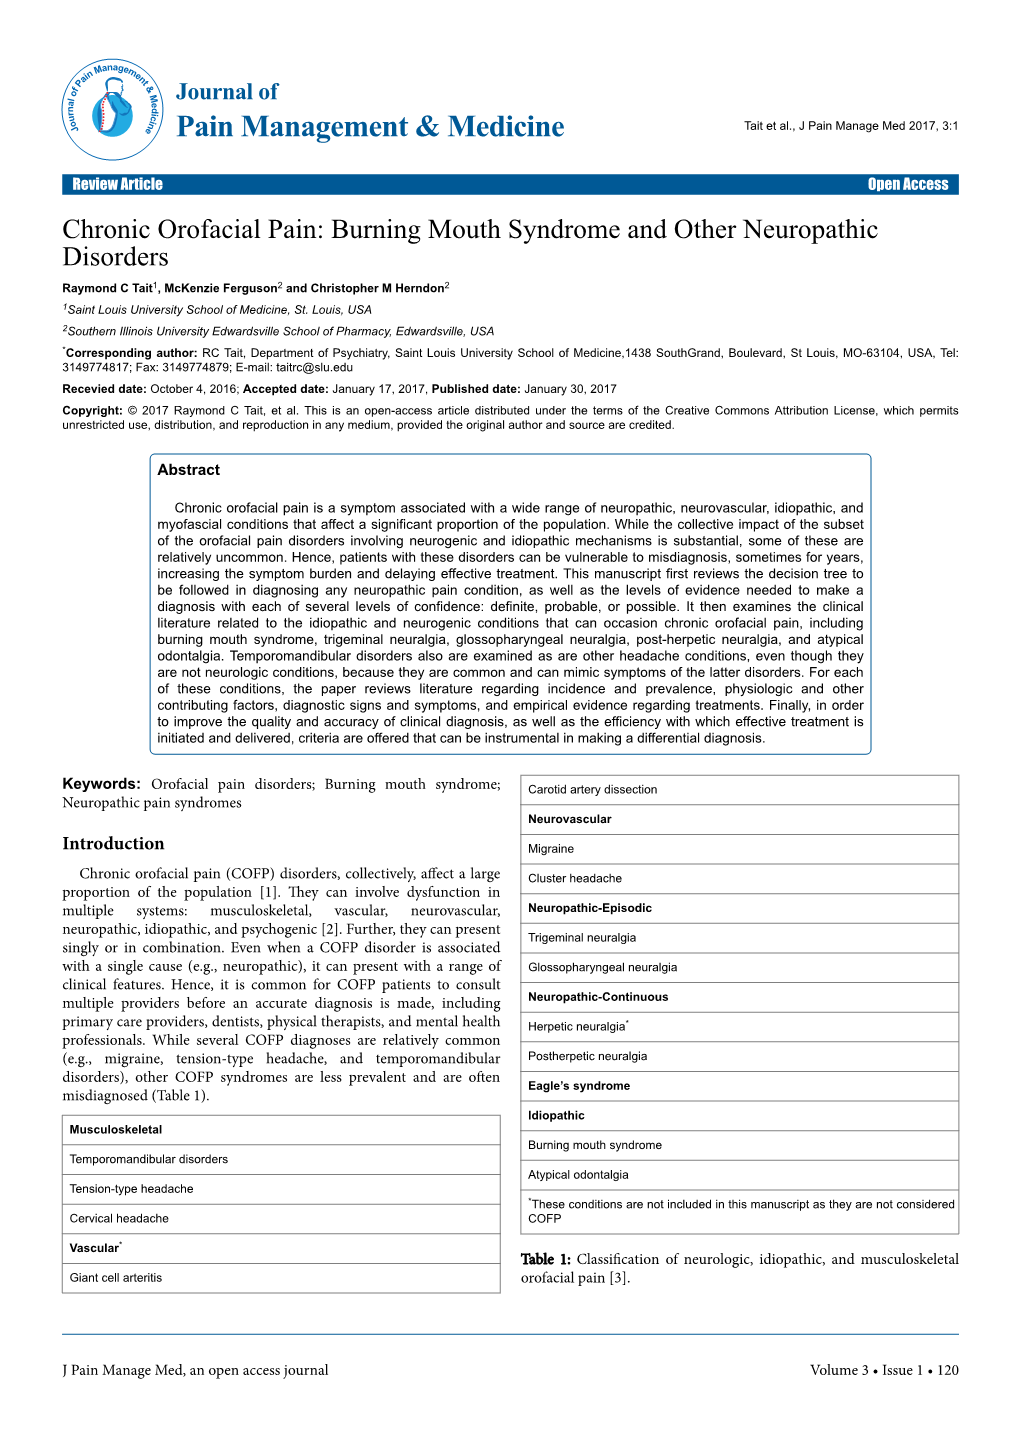 Chronic Orofacial Pain: Burning Mouth Syndrome and Other Neuropathic